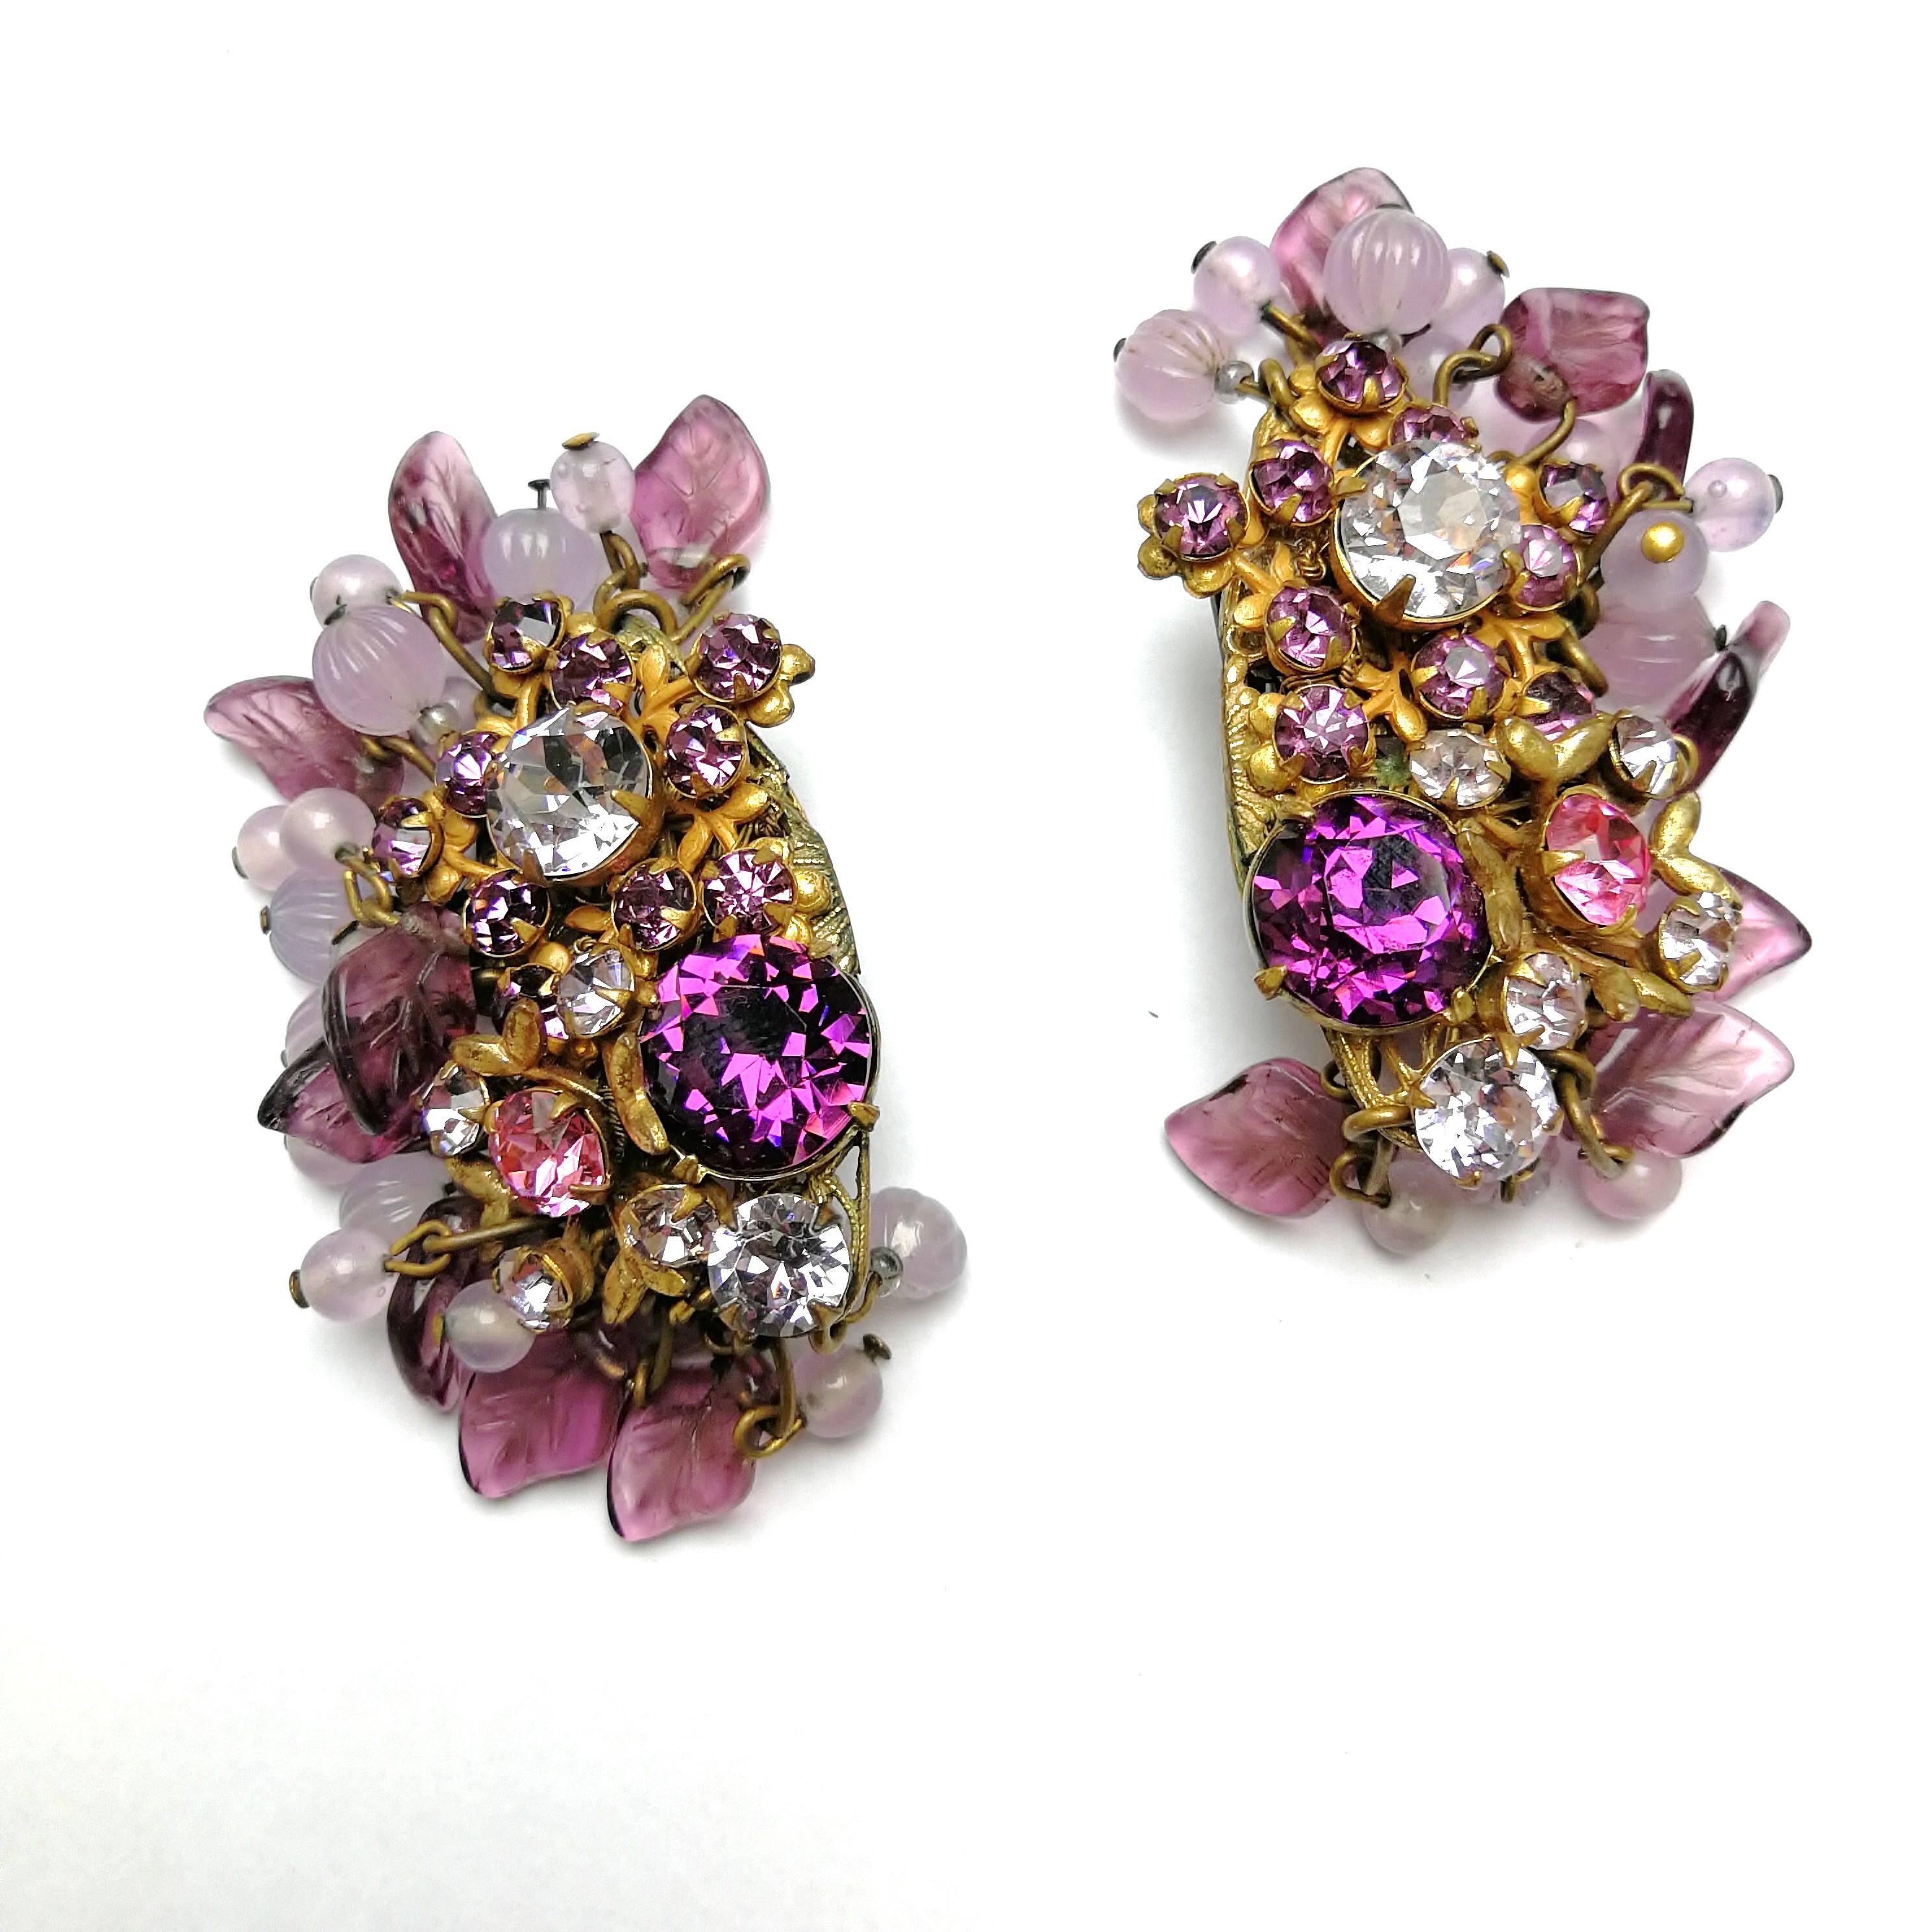 A large and very glamorous pair of Miriam Haskell earrings, in ravishing lilacs, purples and pinks, with moulded leaf elements, melon cut and regular beads cascading from the outer edge of each earring. A statement earring but with a sublety and